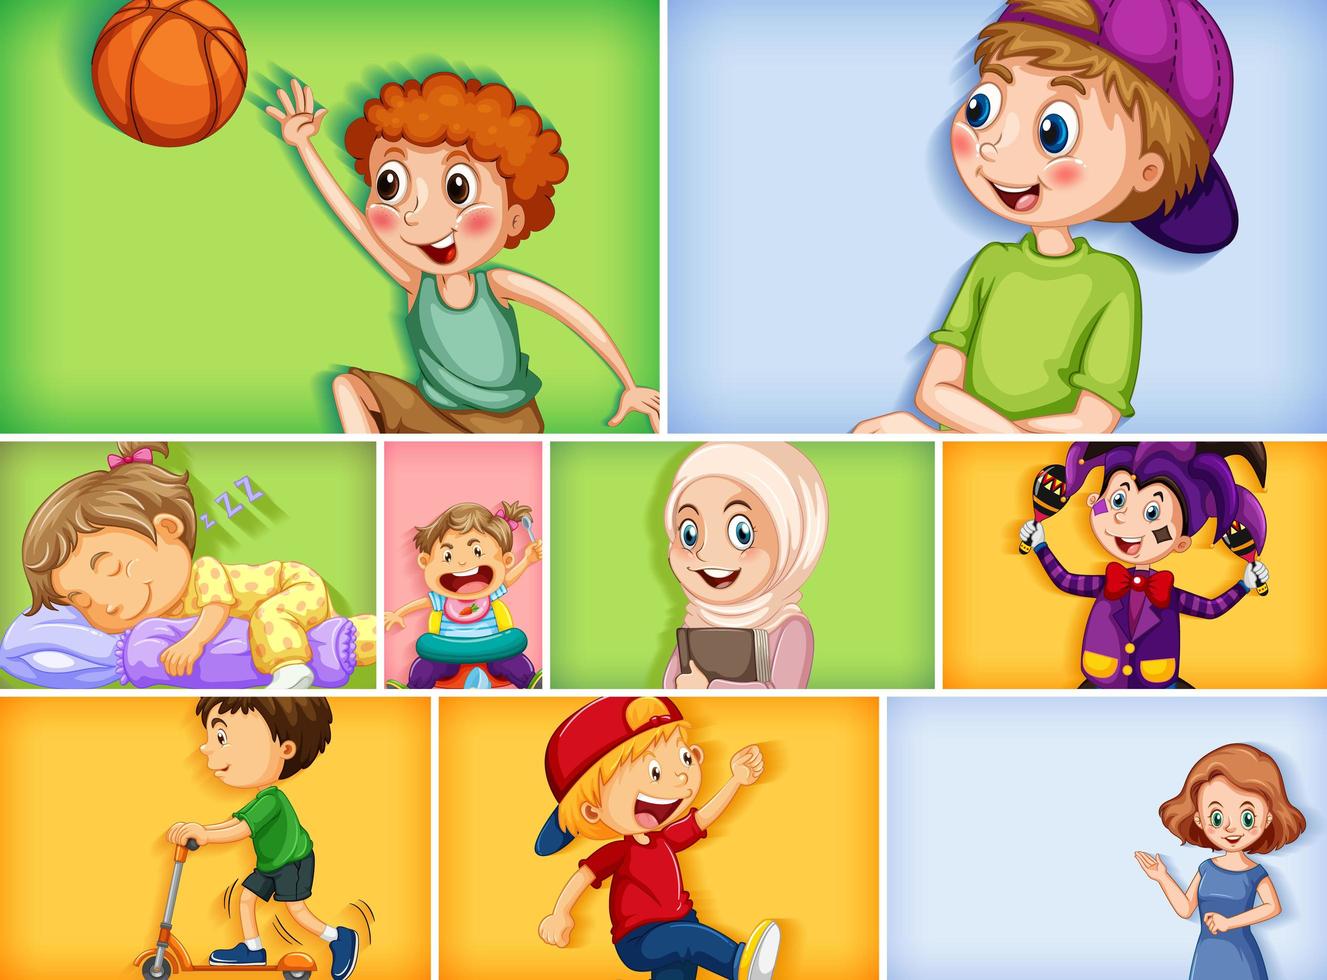 Set of different kid characters on different color background vector